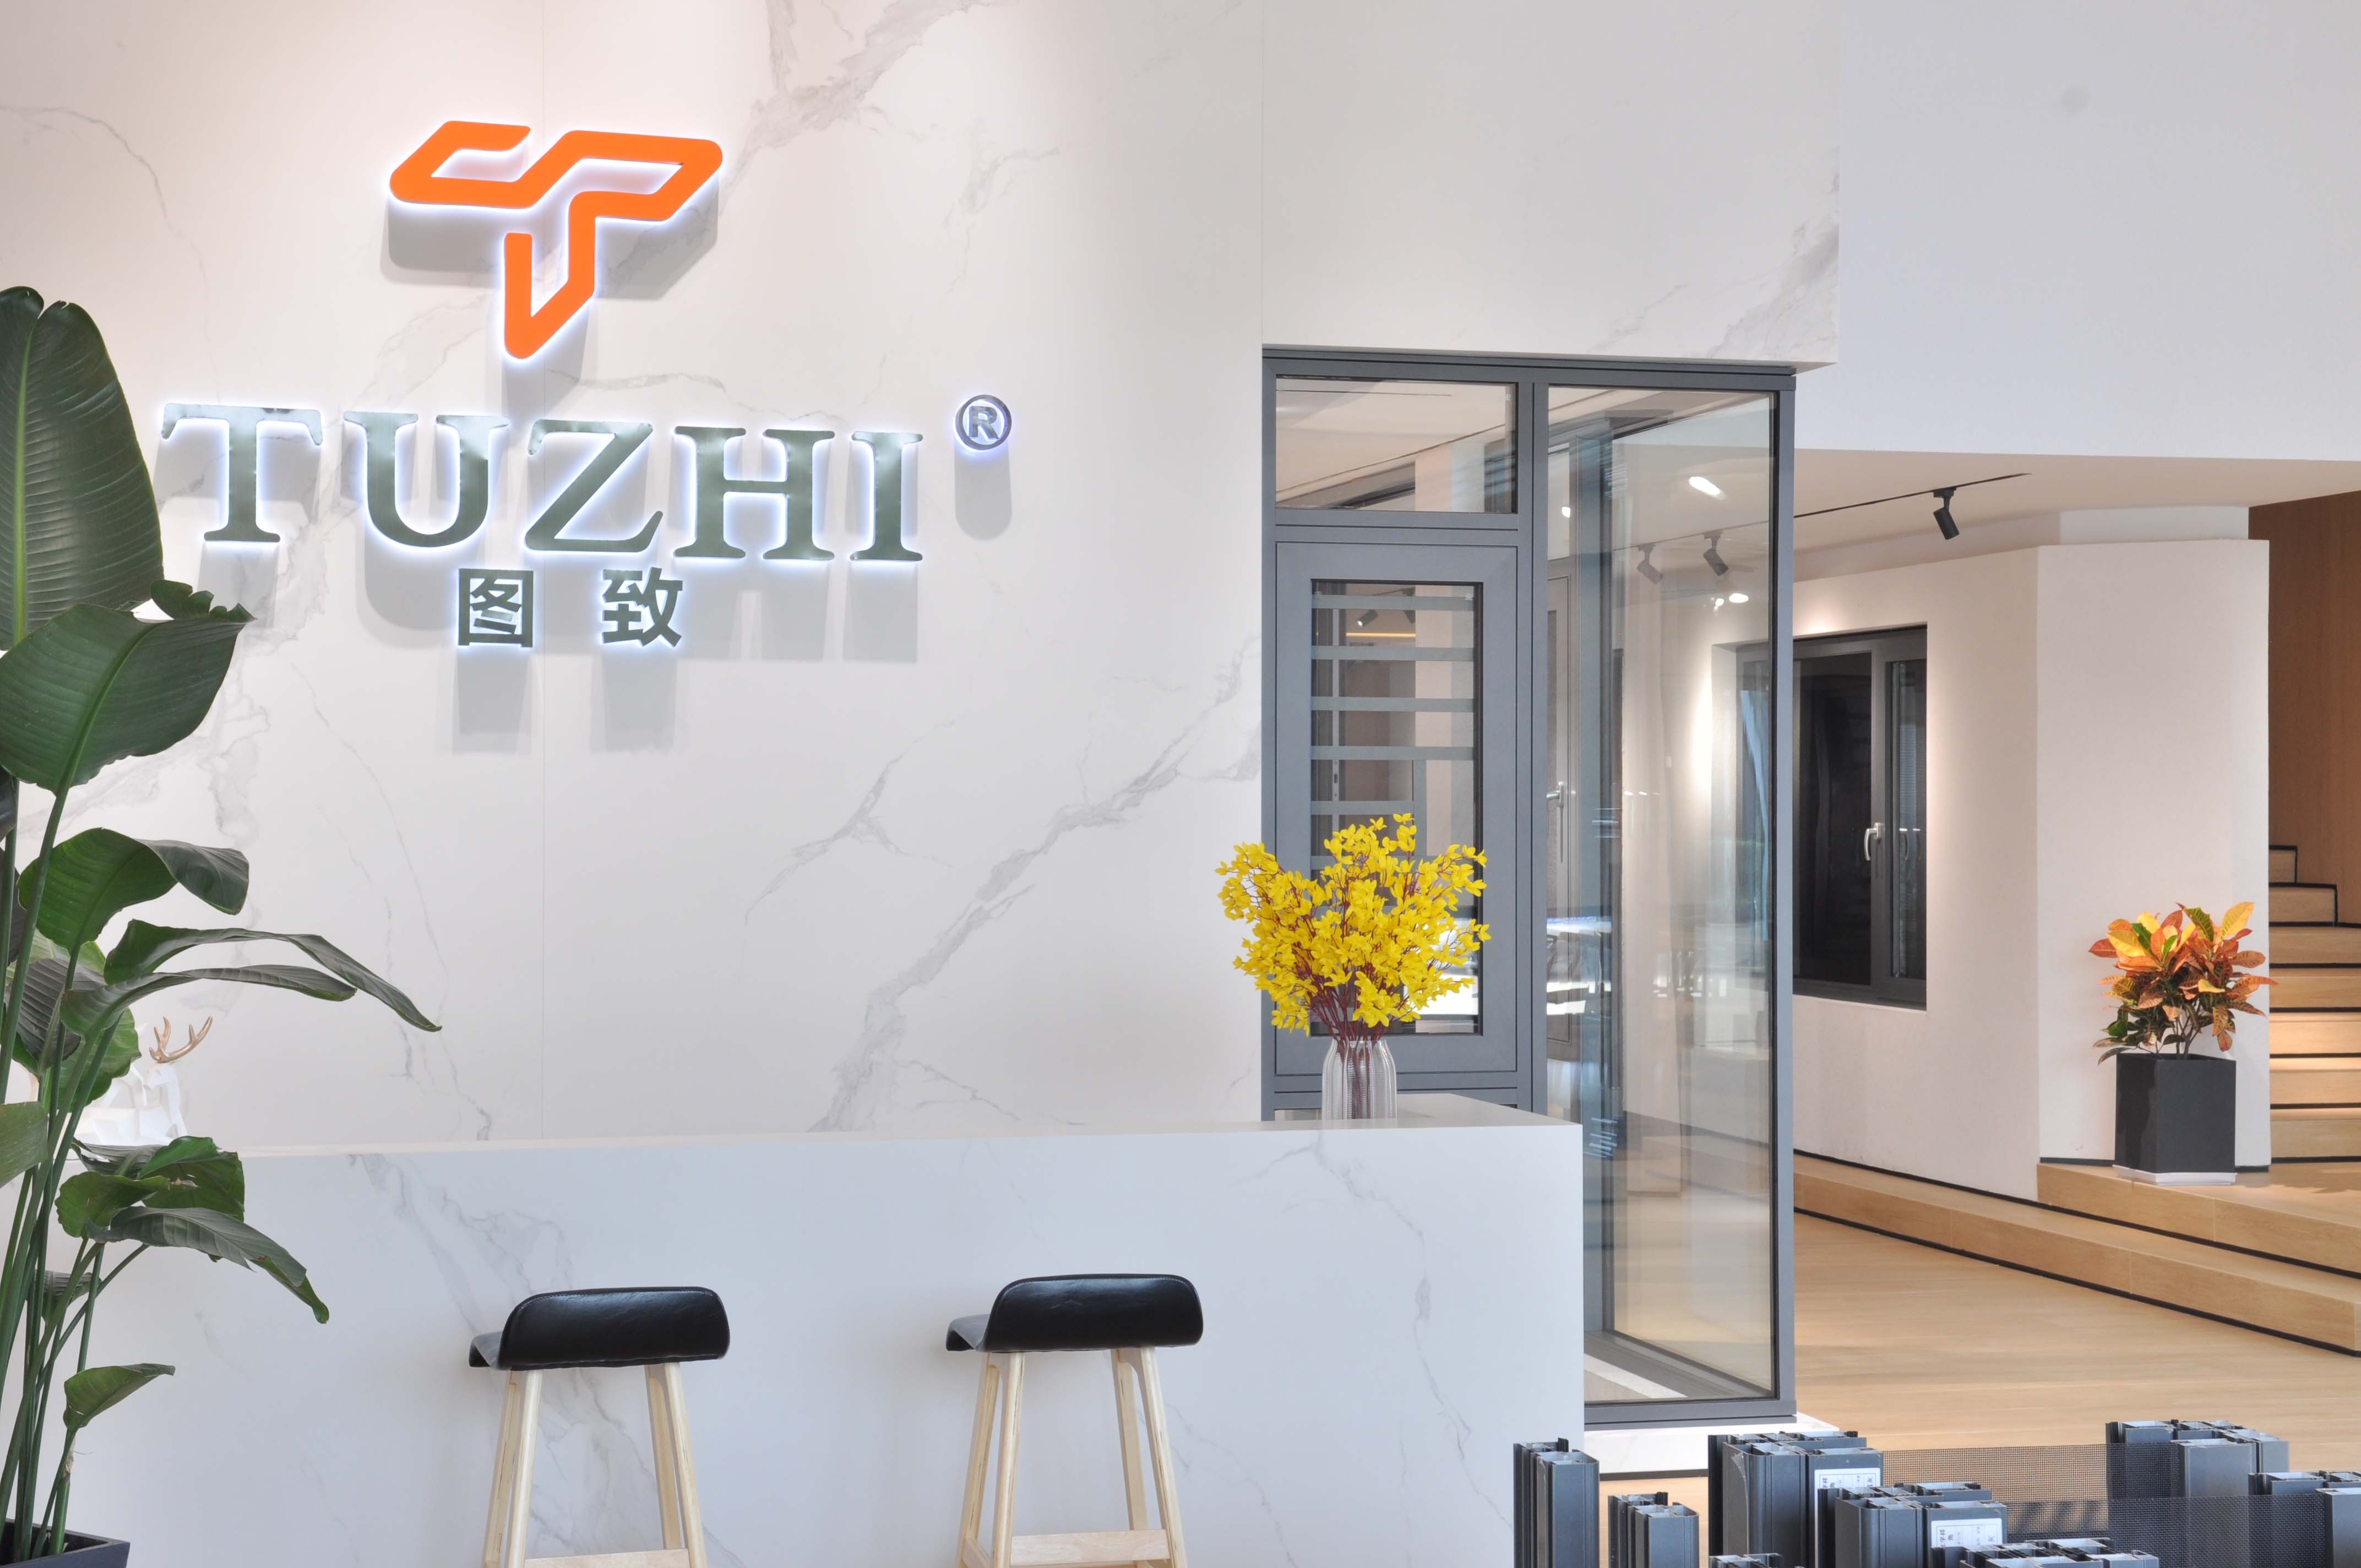 Why should you choose Tuzhi as one of your partners in aluminum product sourcing?